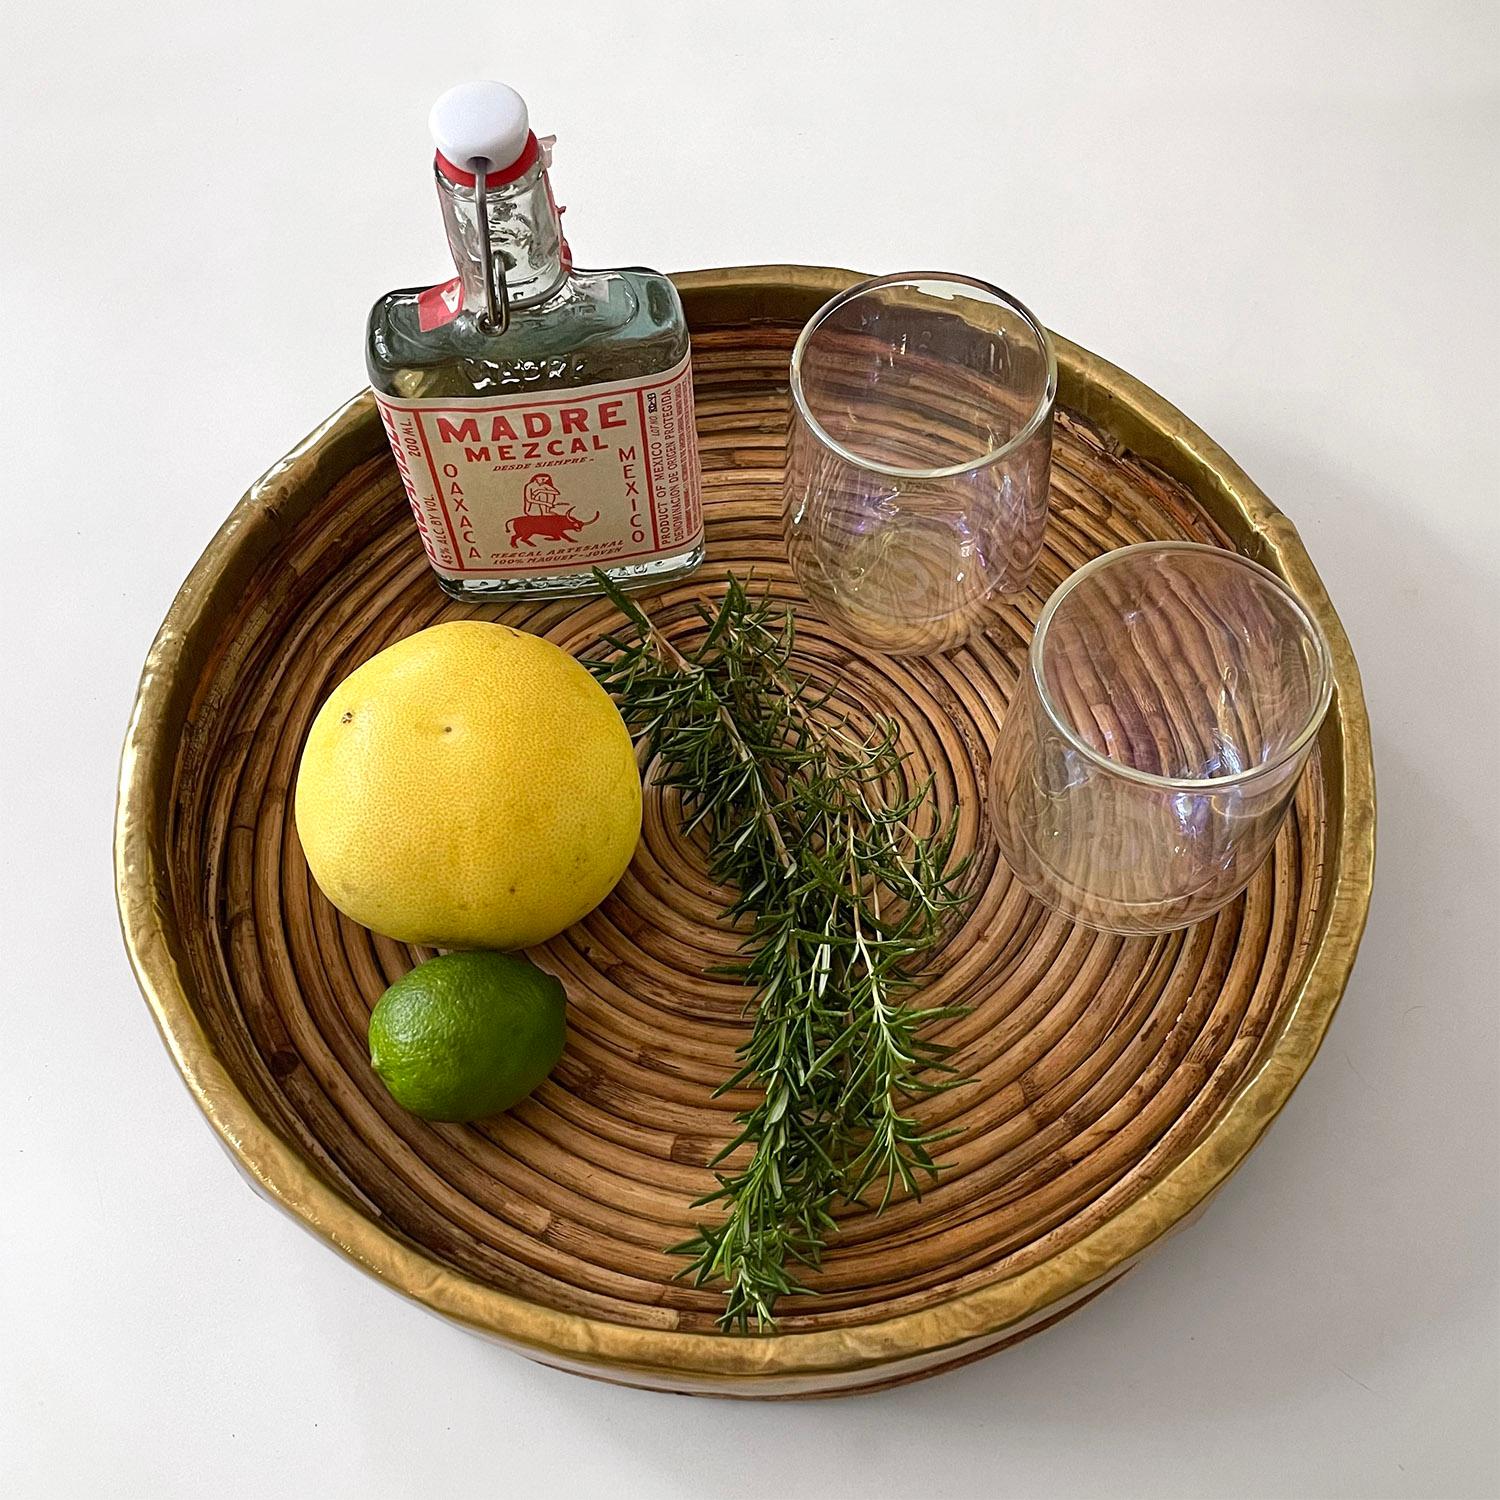 Italian rattan and brass tray in the style of Gabriella Crespi
Coiled rattan with natural color variations
Aged brass rim
Patina from age and use
Wonderful addition to any surface 